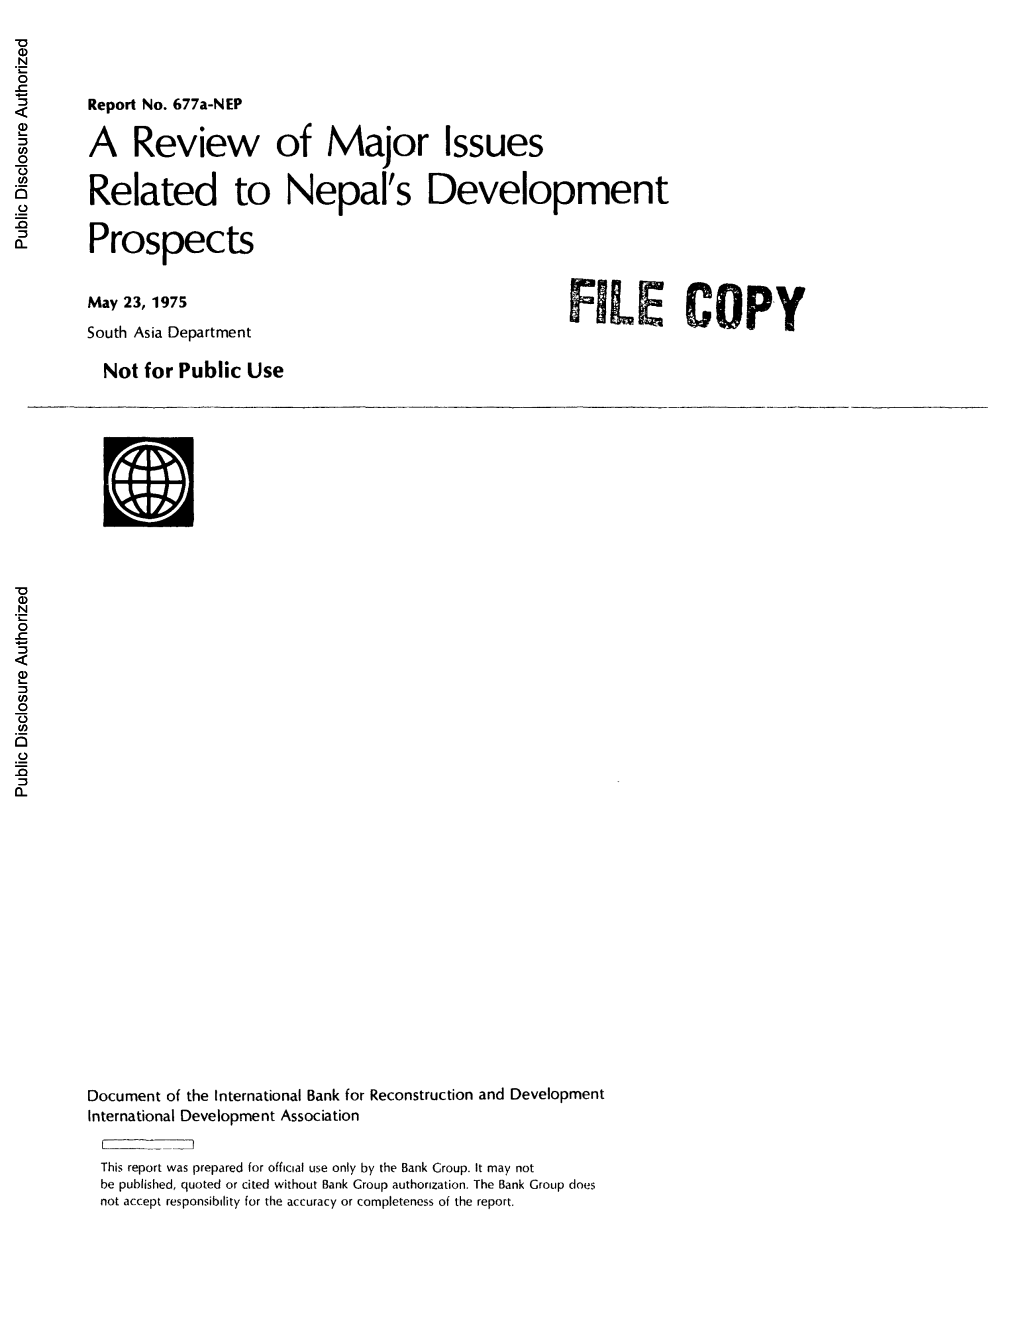 A Review of Major Issues Related to Nepal's Development Prospects